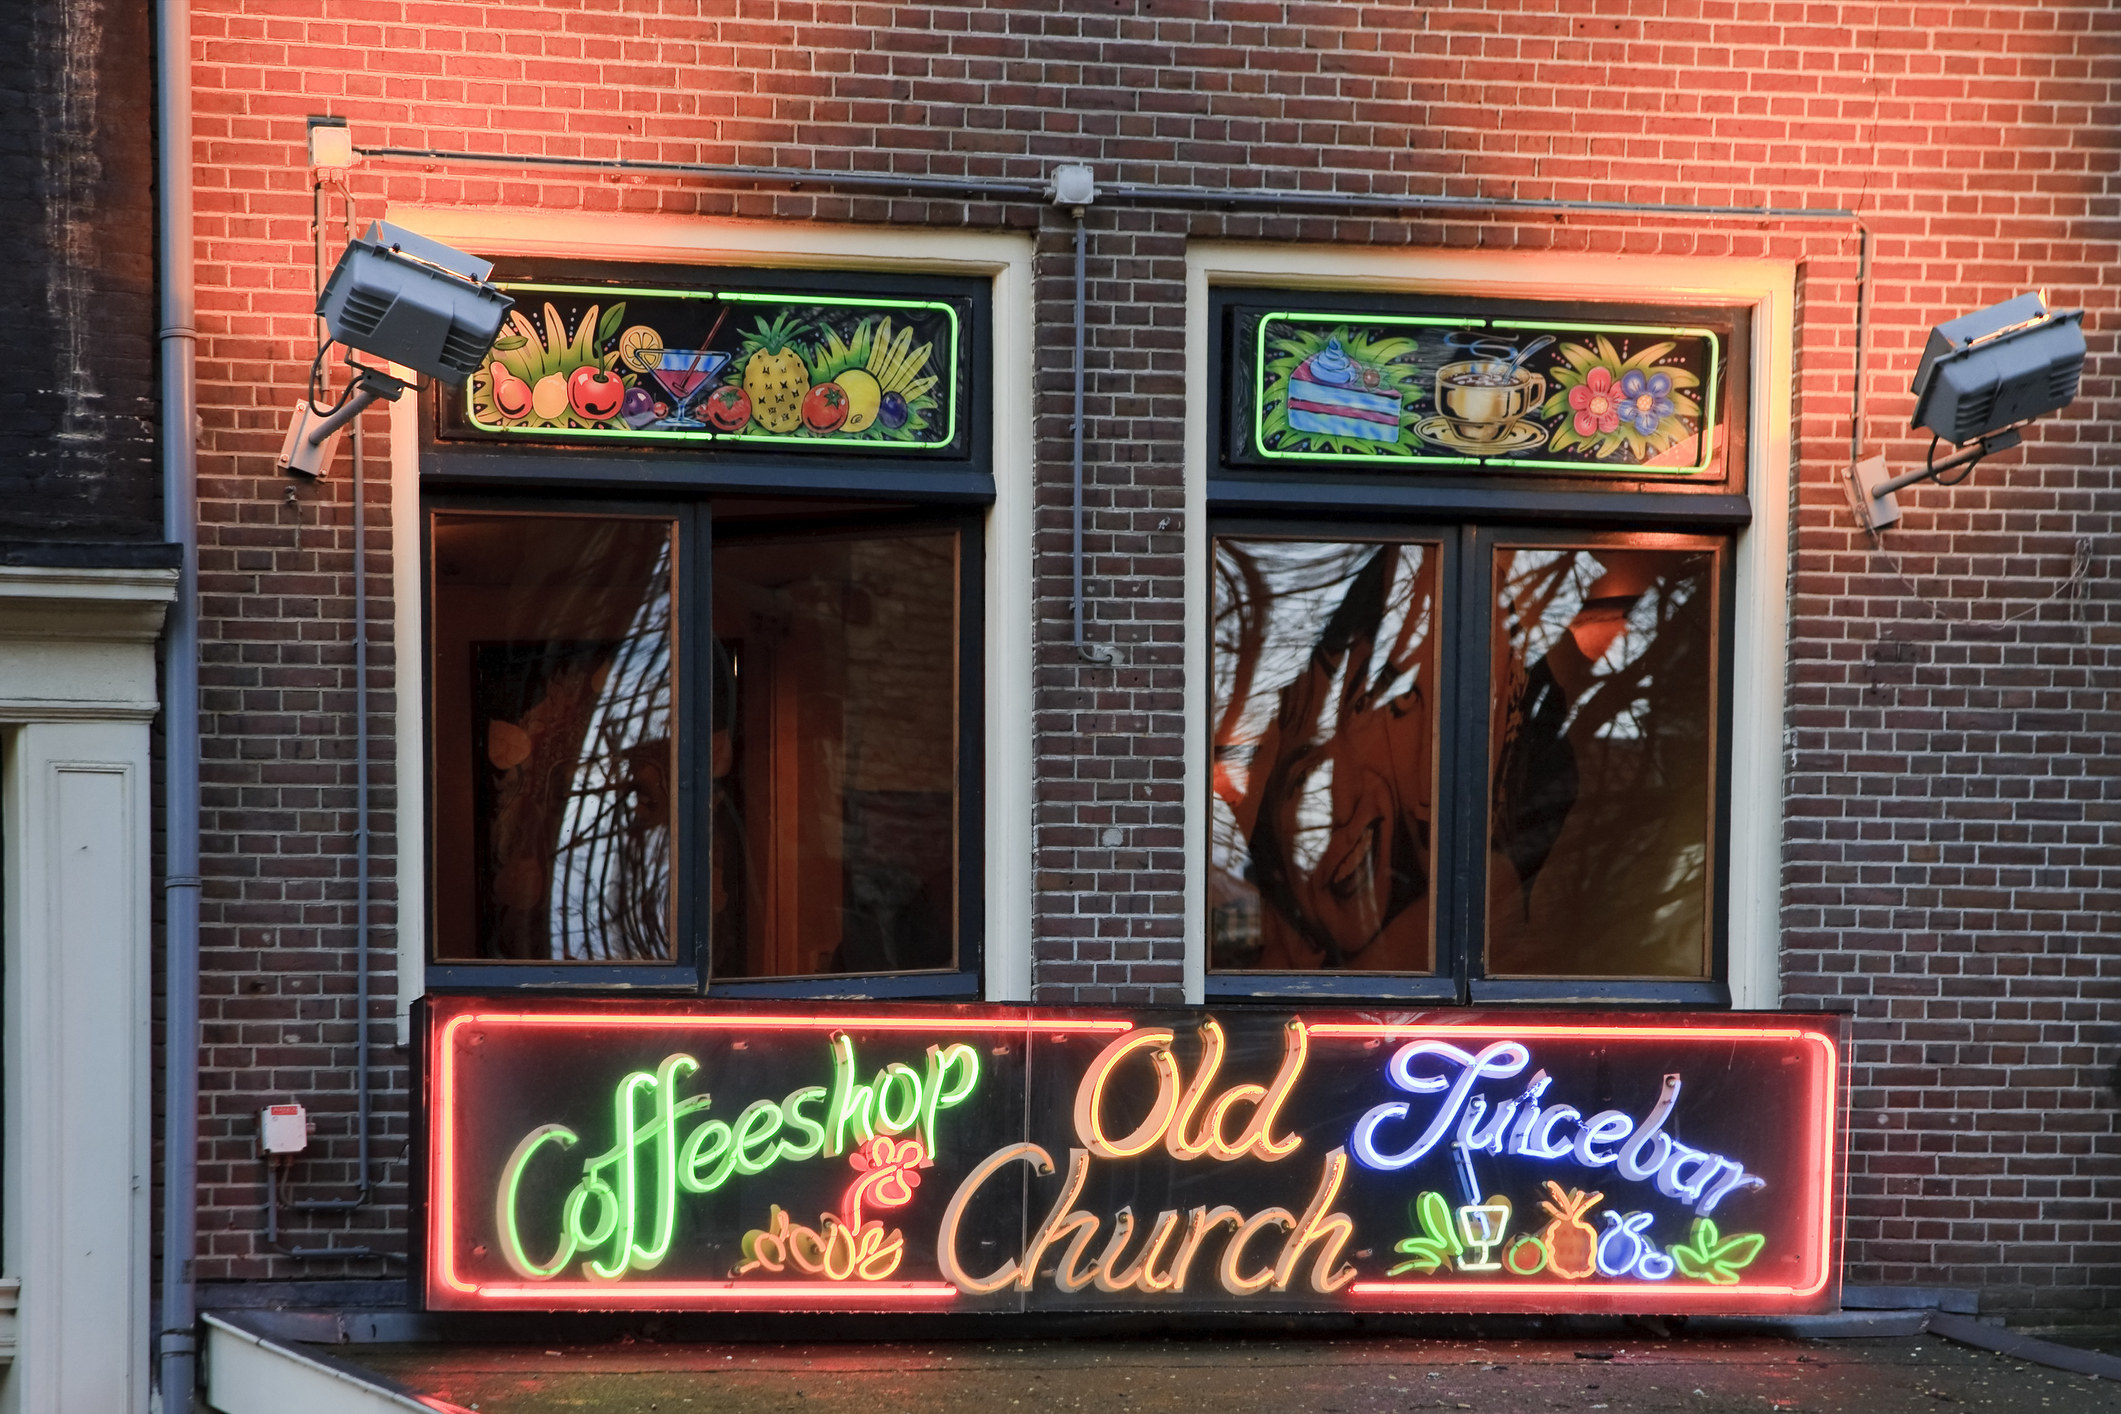 A coffee shop with a neon sign